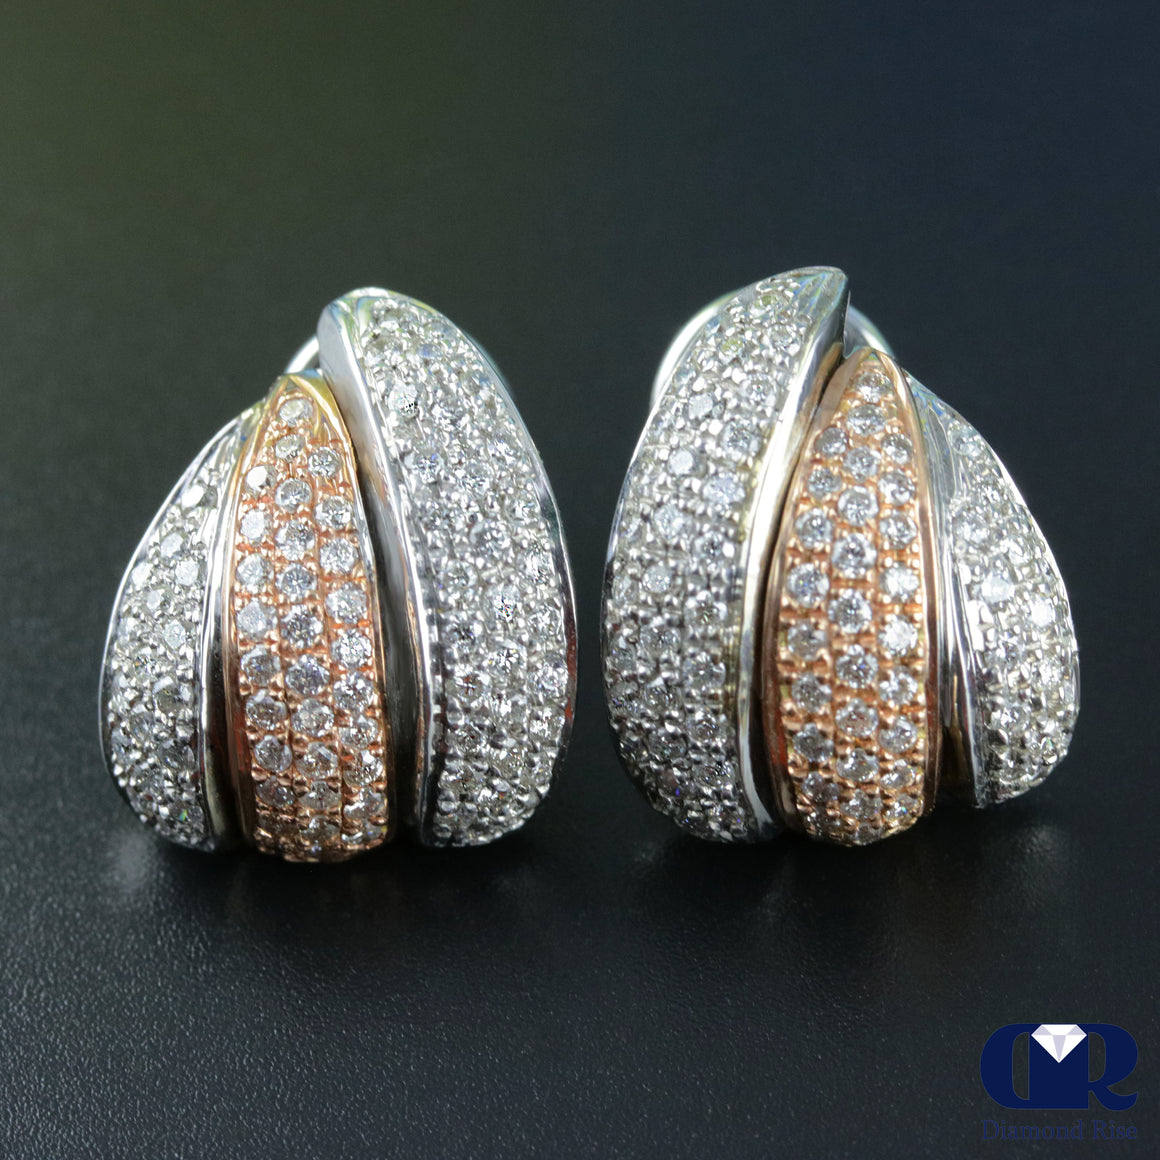 2.00 Carat Diamond Earrings In 14K Rose Gold & White Gold With Omega Back - Diamond Rise Jewelry